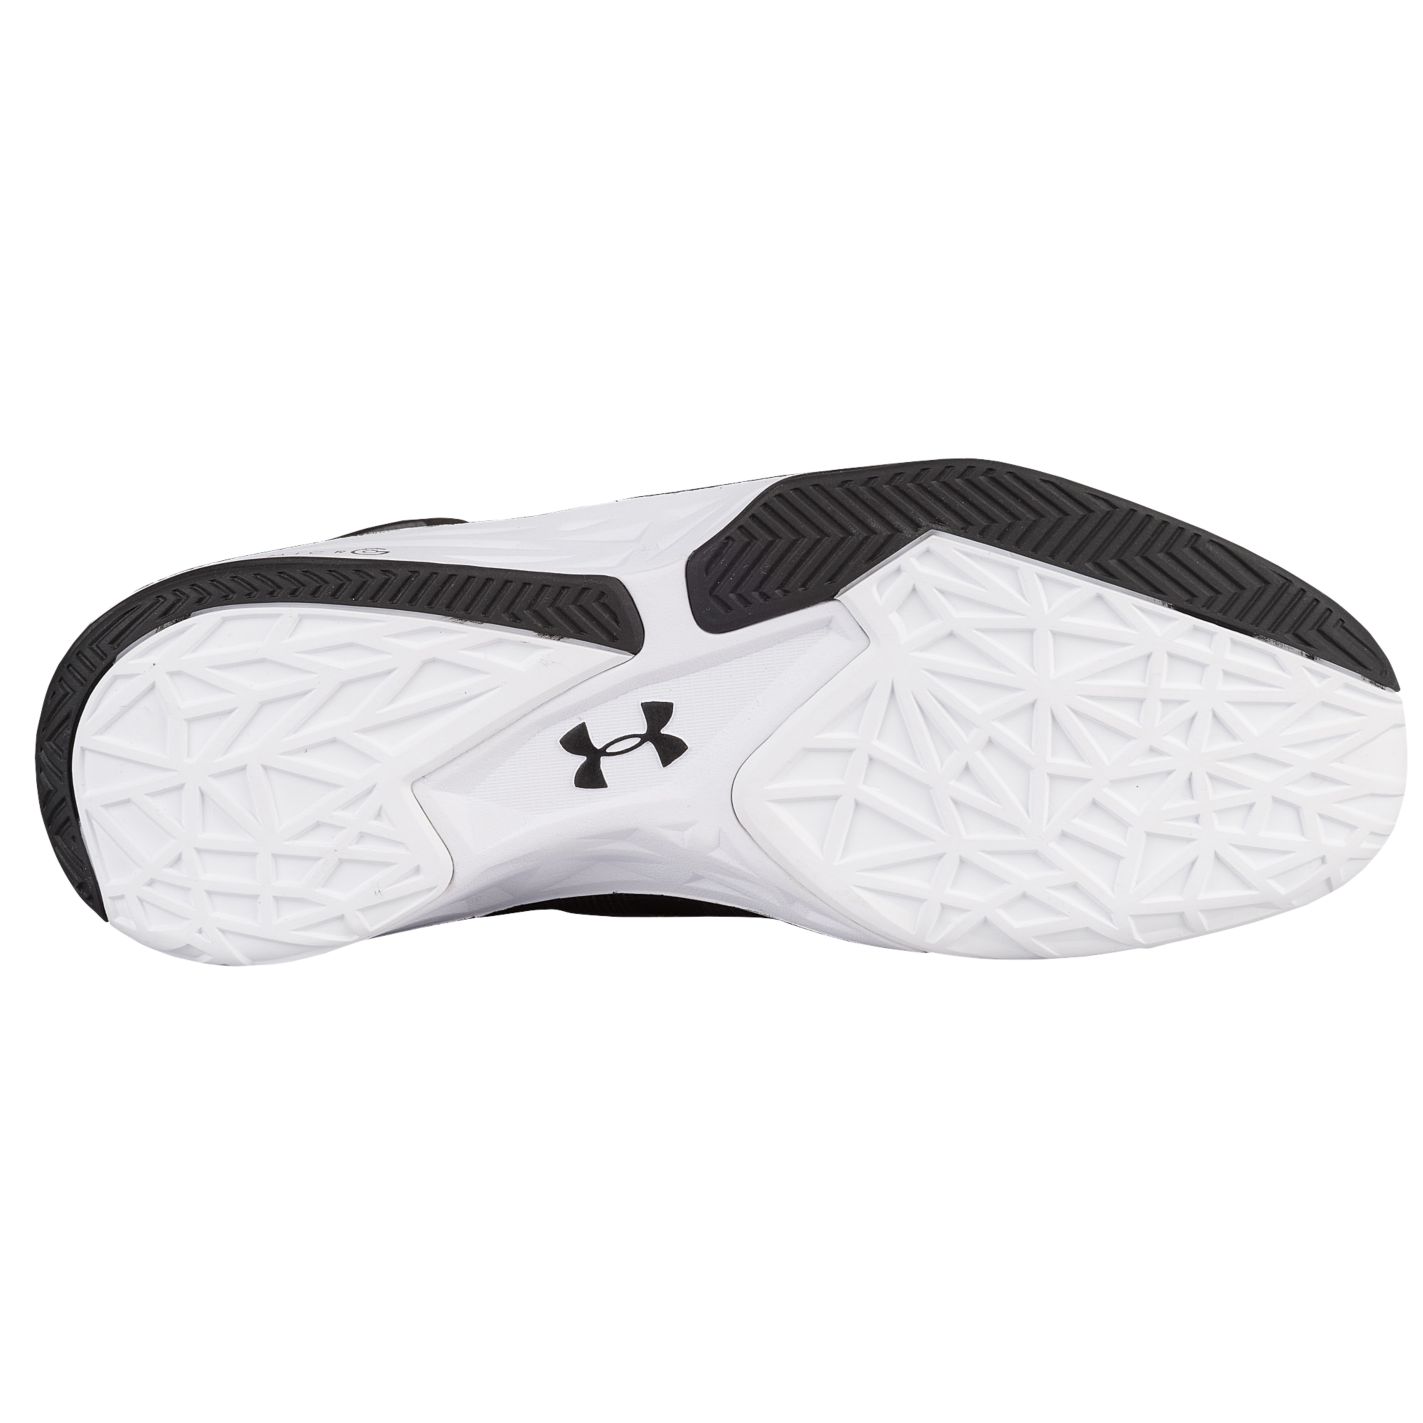 The Under Armour Fire Shot is Available Now 12